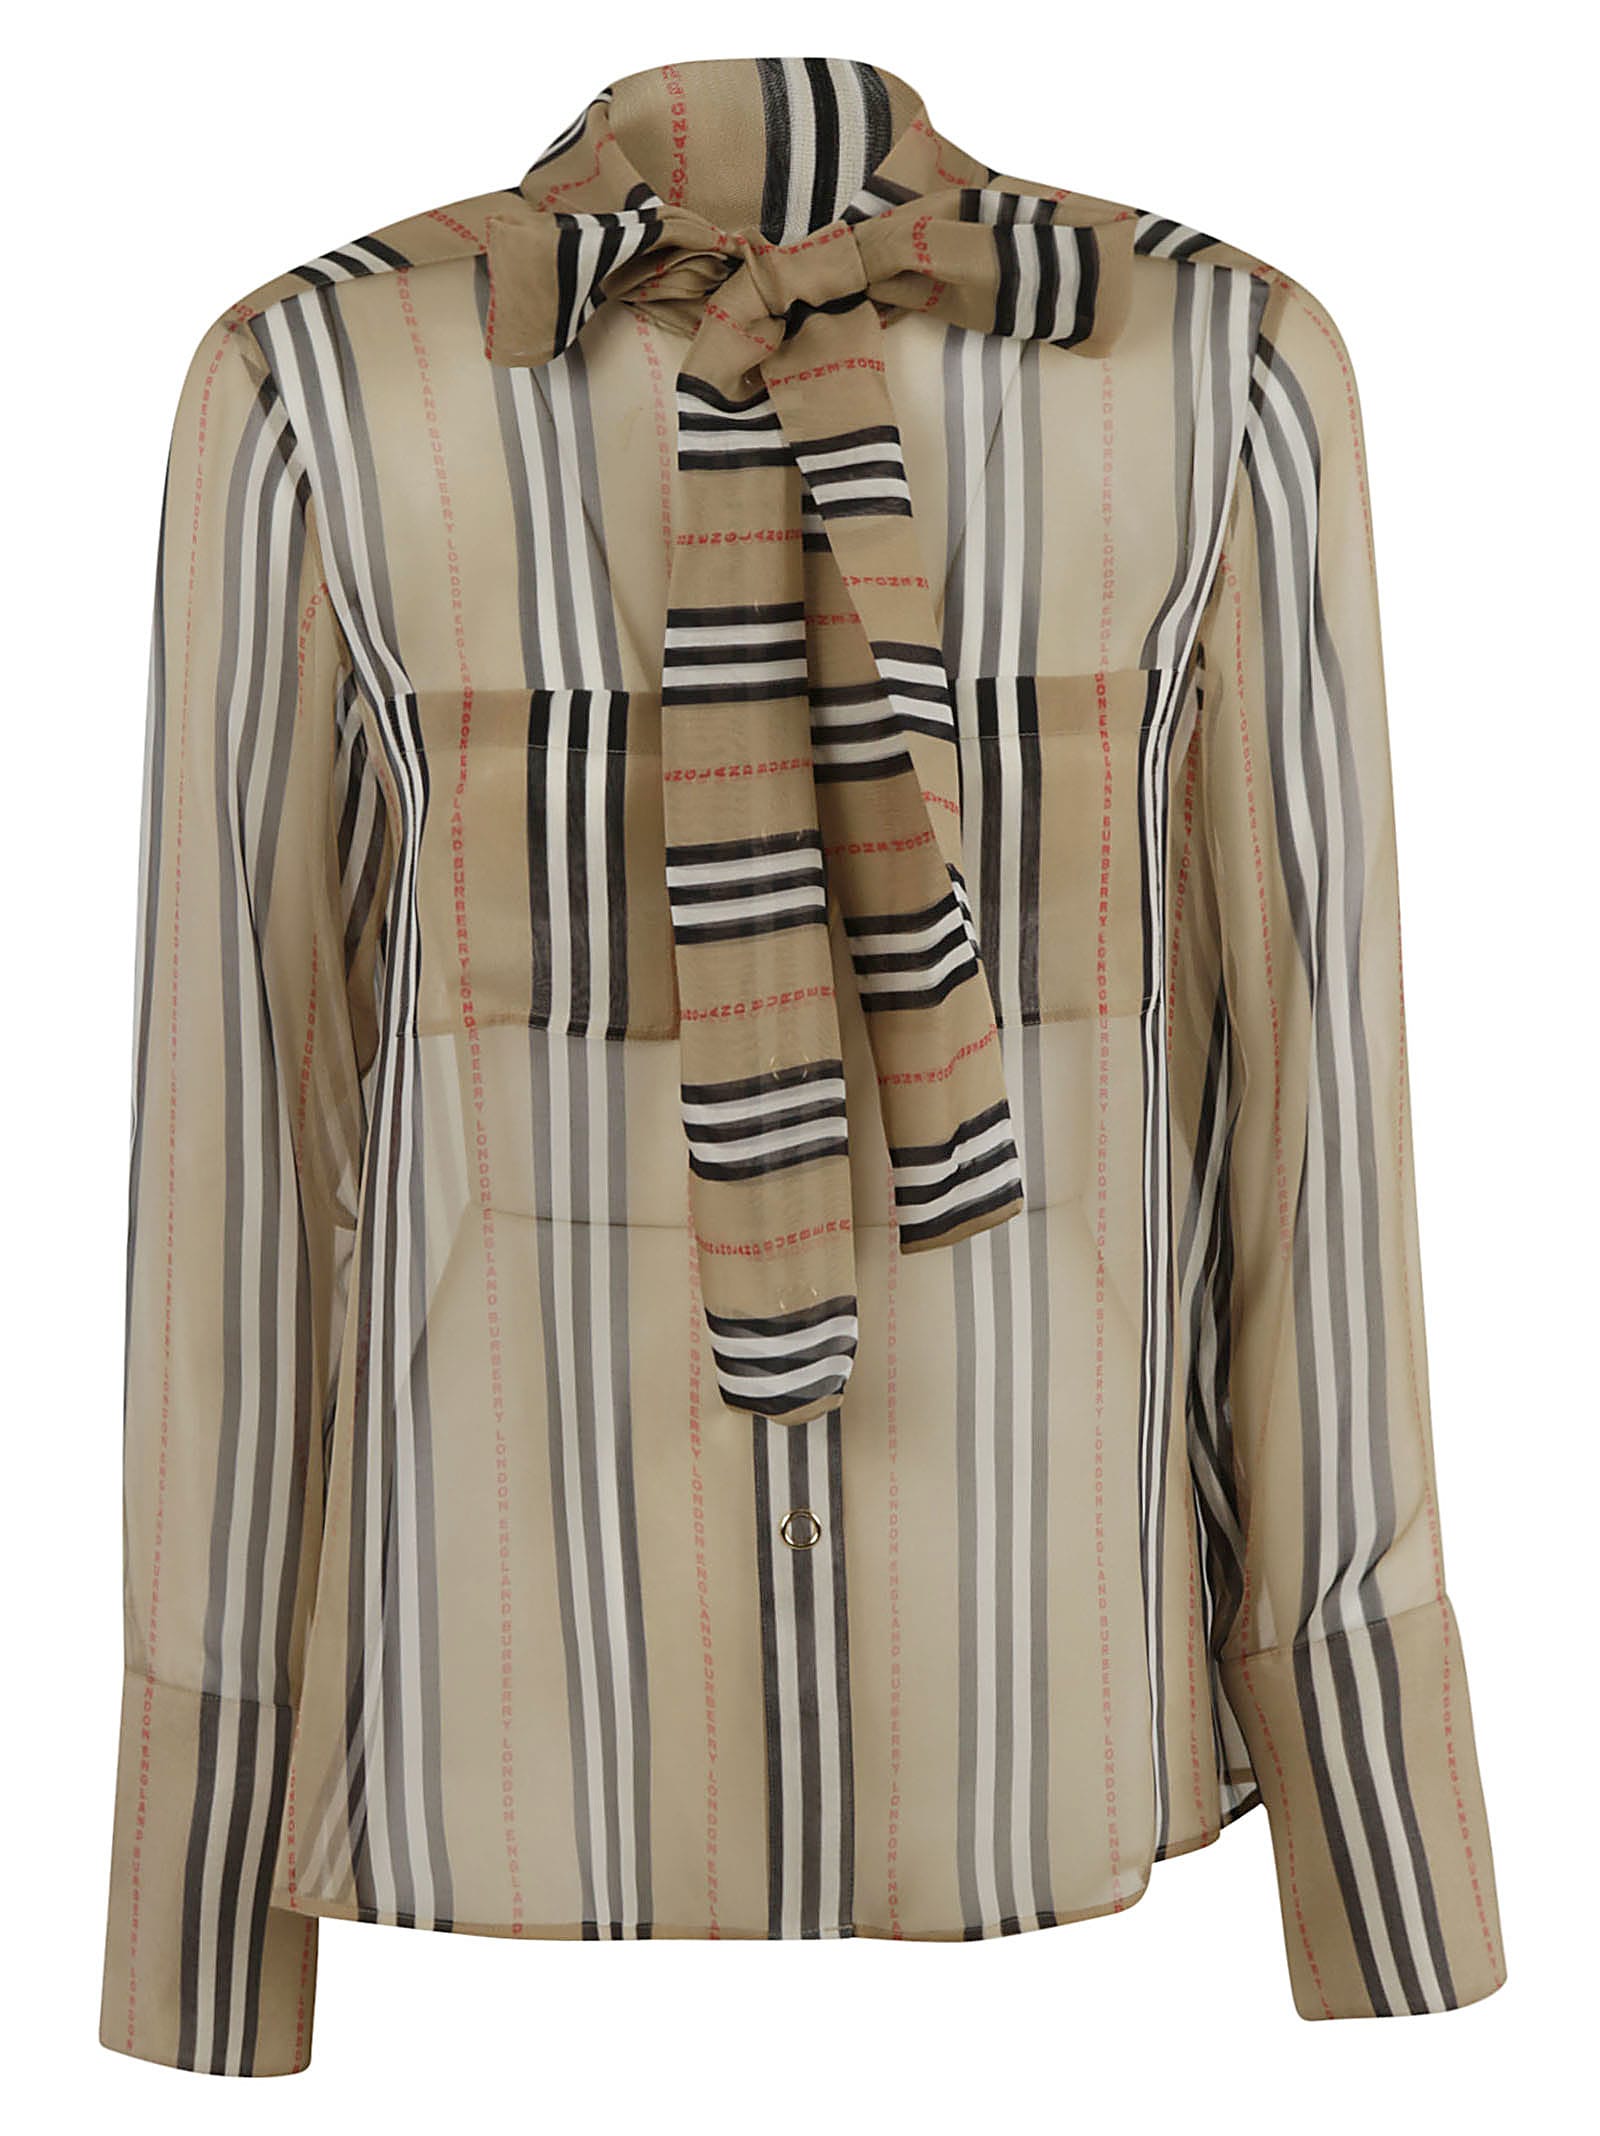 BURBERRY BOW-TIE DETAIL STRIPED BLOUSE,11288640